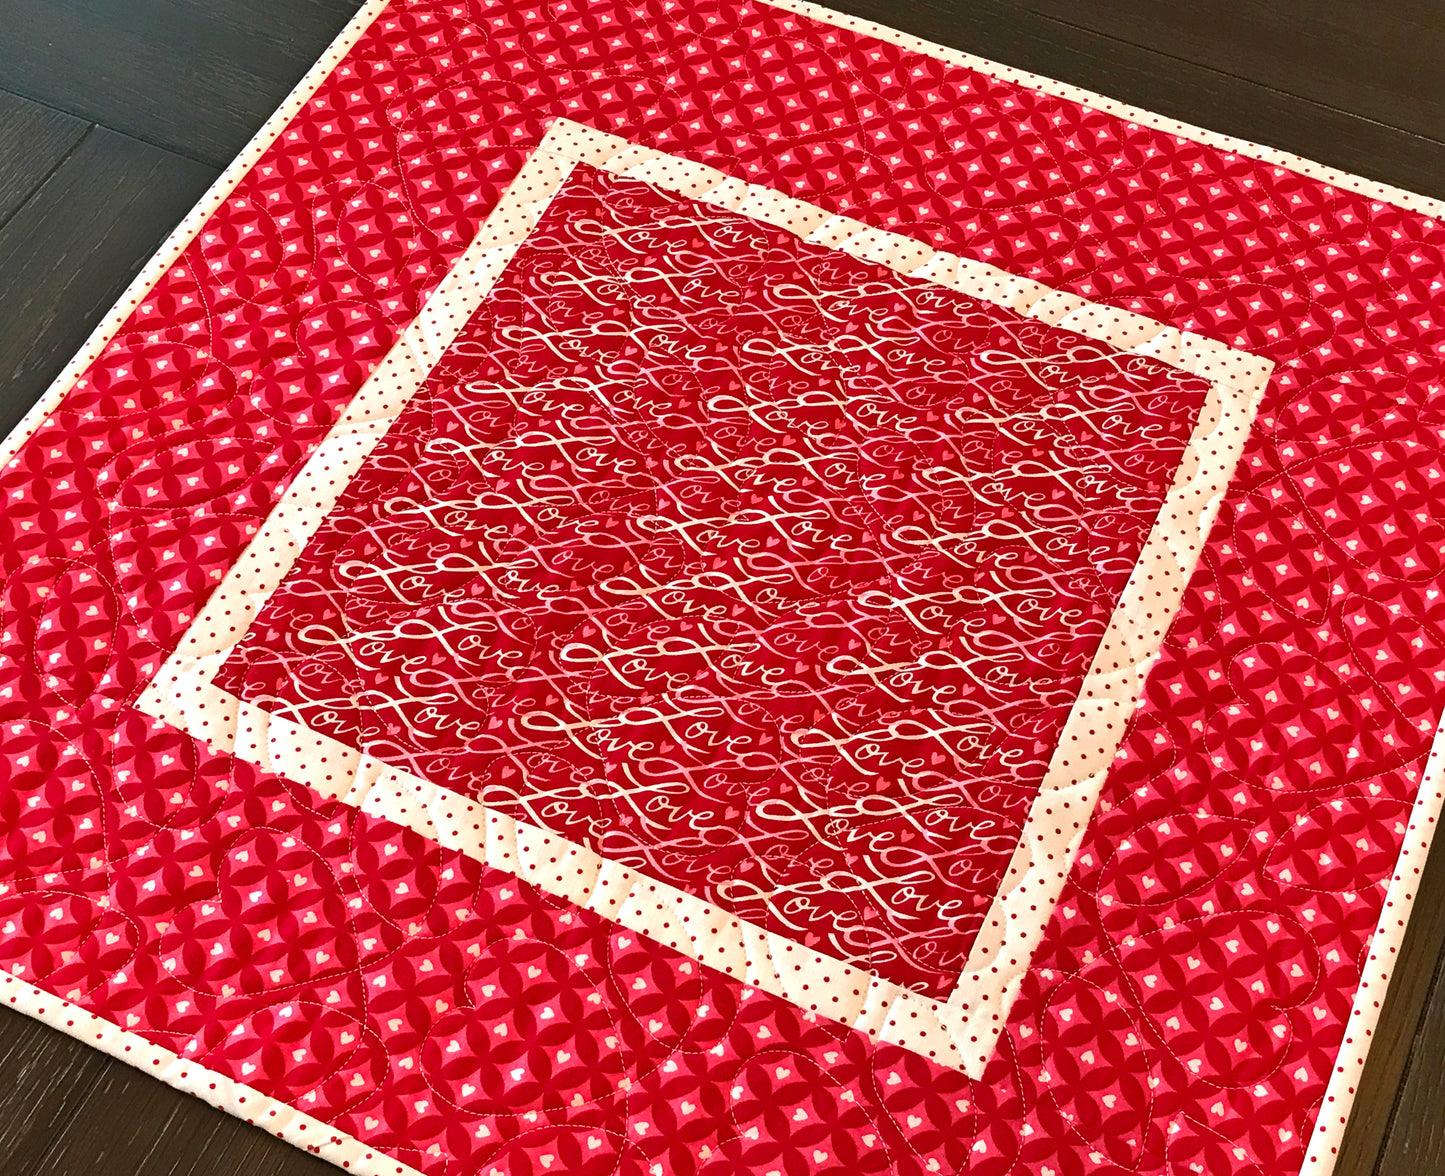 Valentine's Day Table Topper - Handmade Quilts, Digital Patterns, and Home Décor items online - Cuddle Cat Quiltworks